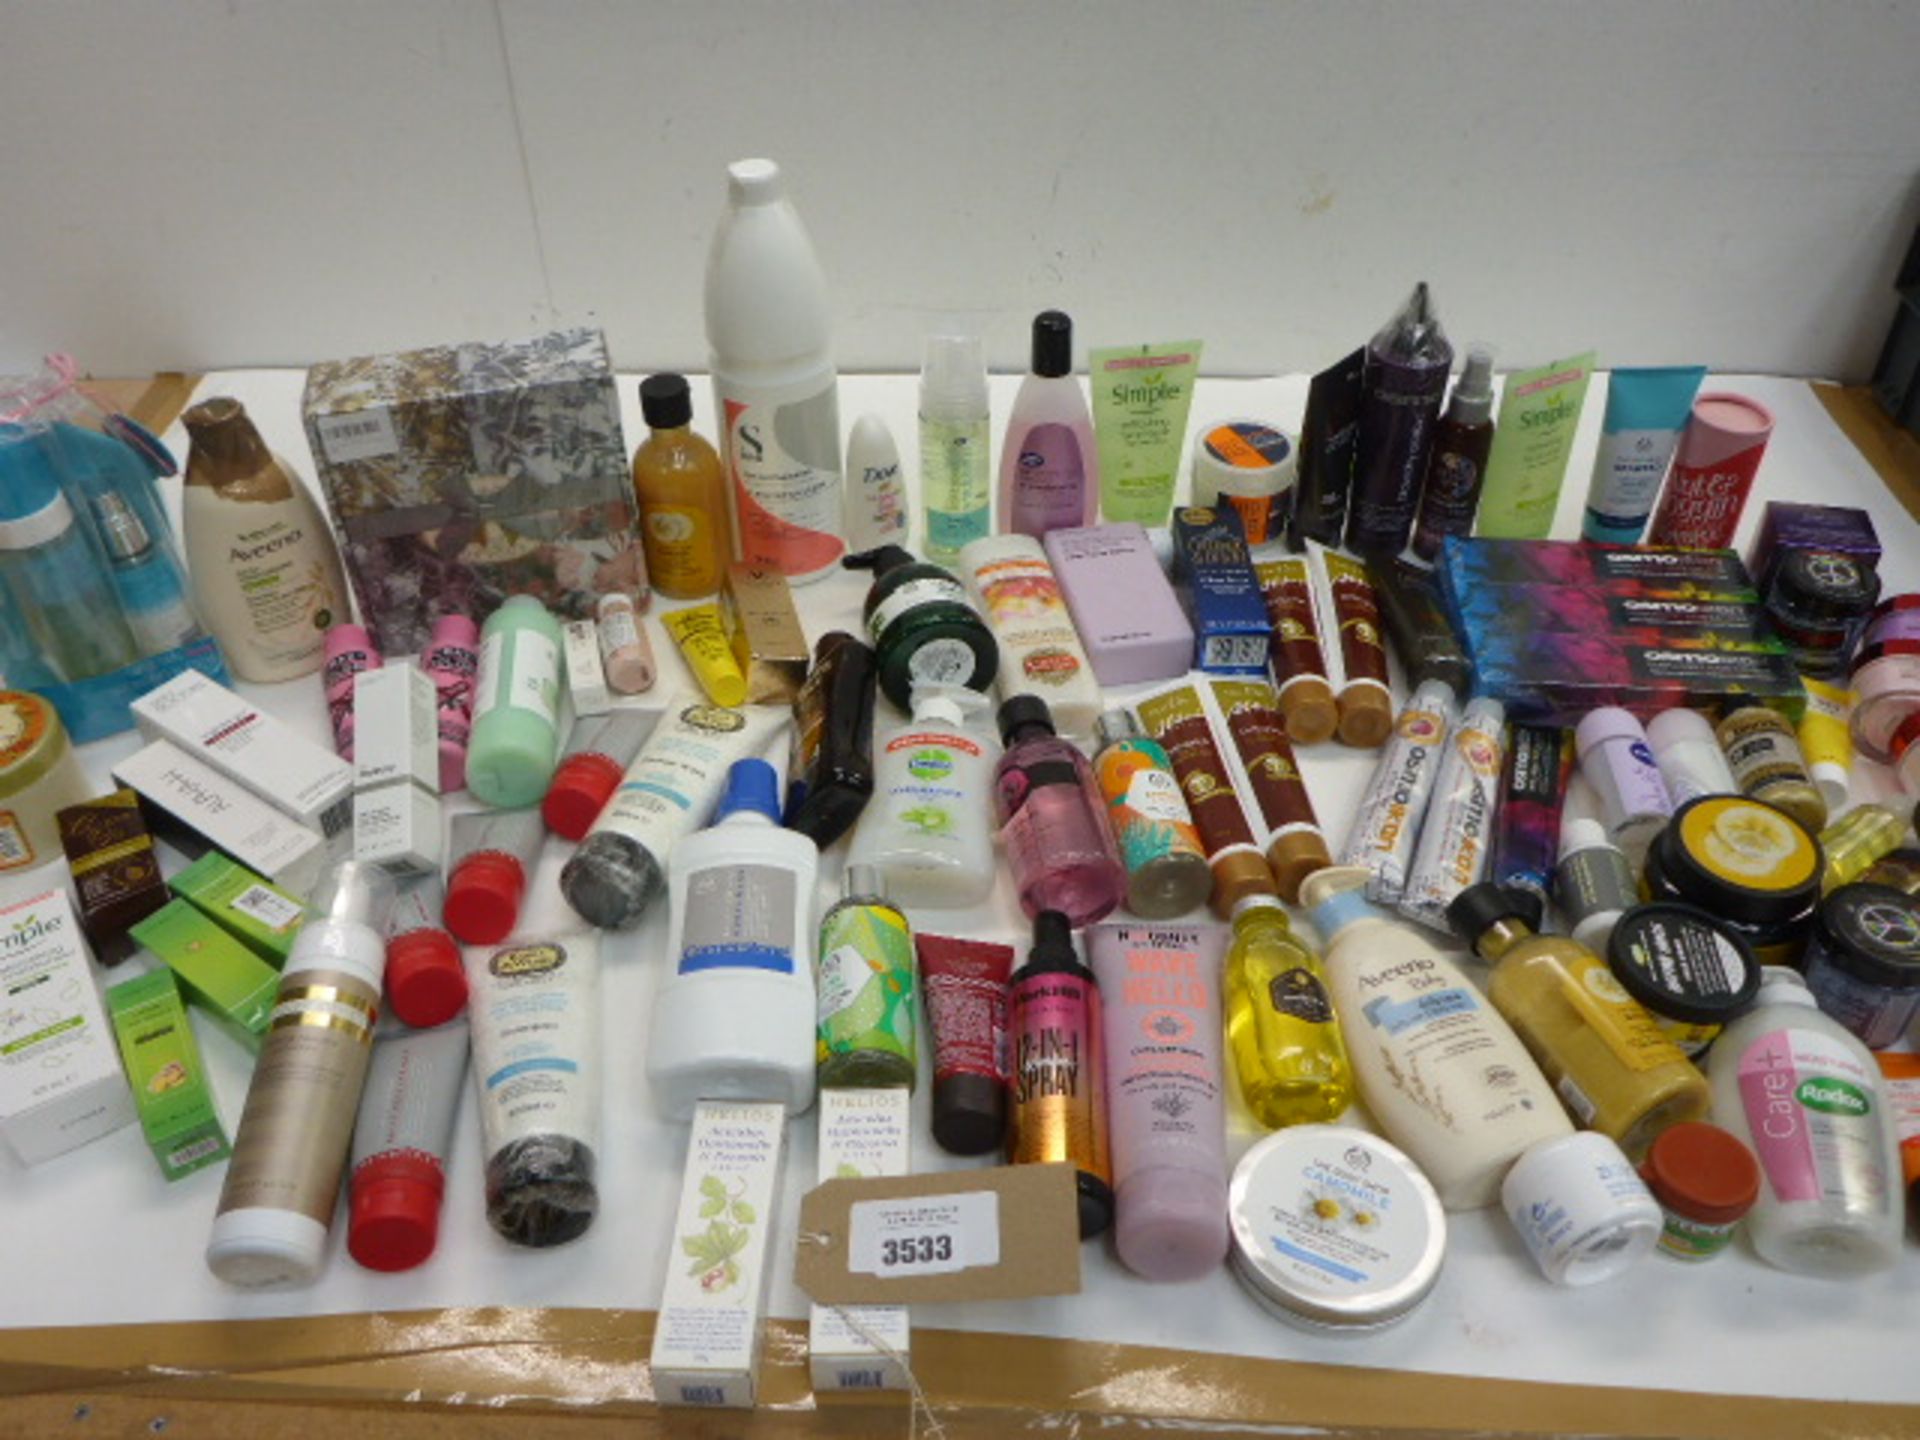 Large bag of toiletries including sun protection, masks, shampoo, conditioner, body wash,